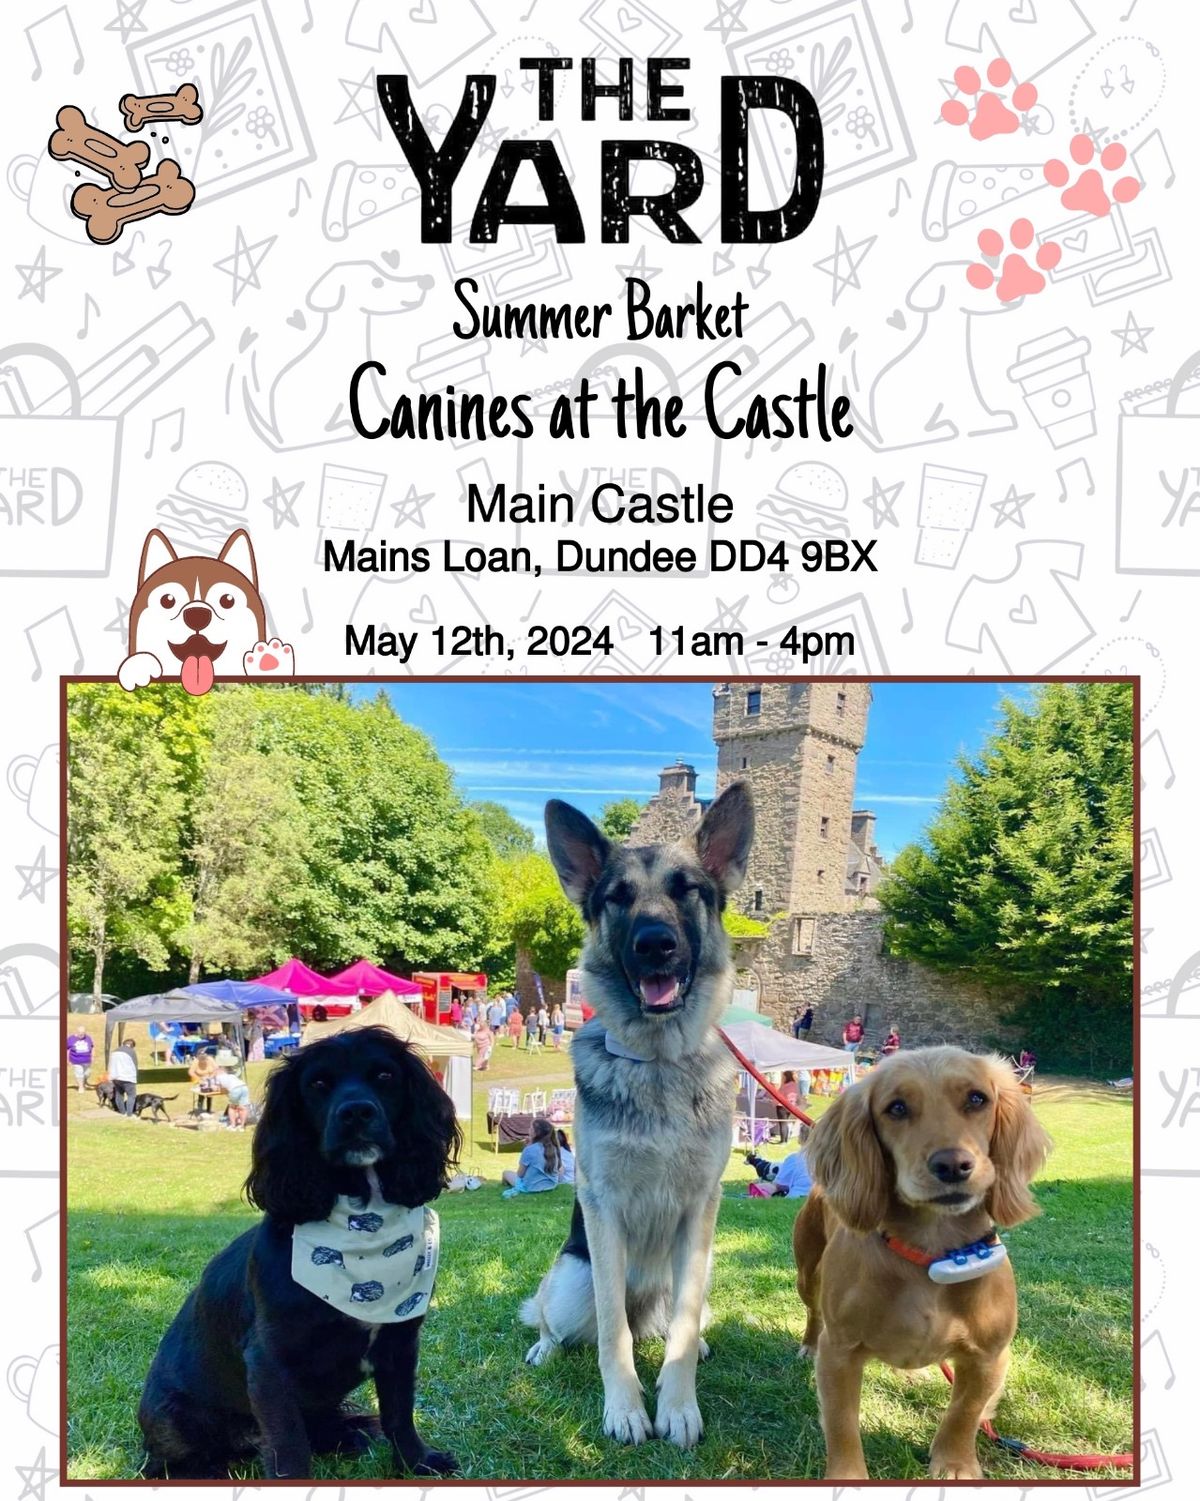 Summer Barket - Canines at the Castle